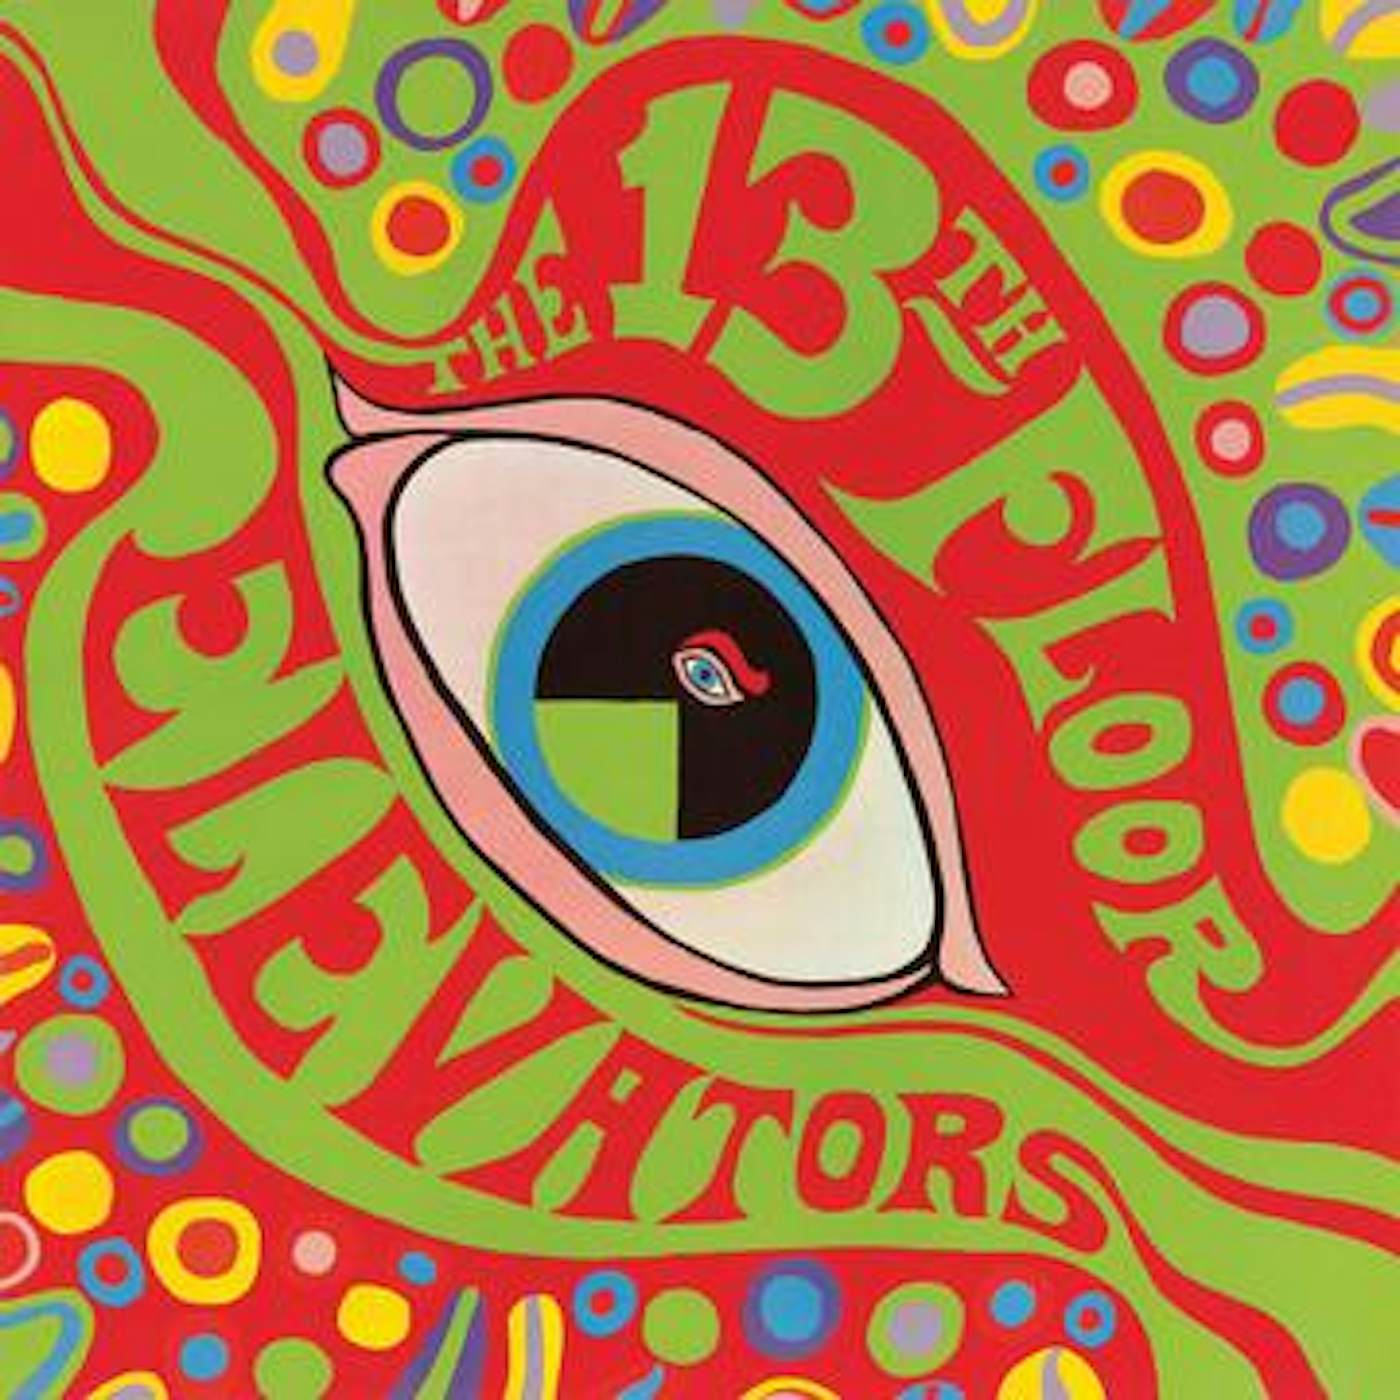 13th Floor Elevators The Psychedelic Sounds Of The 13 Th Floor Vinyl Record